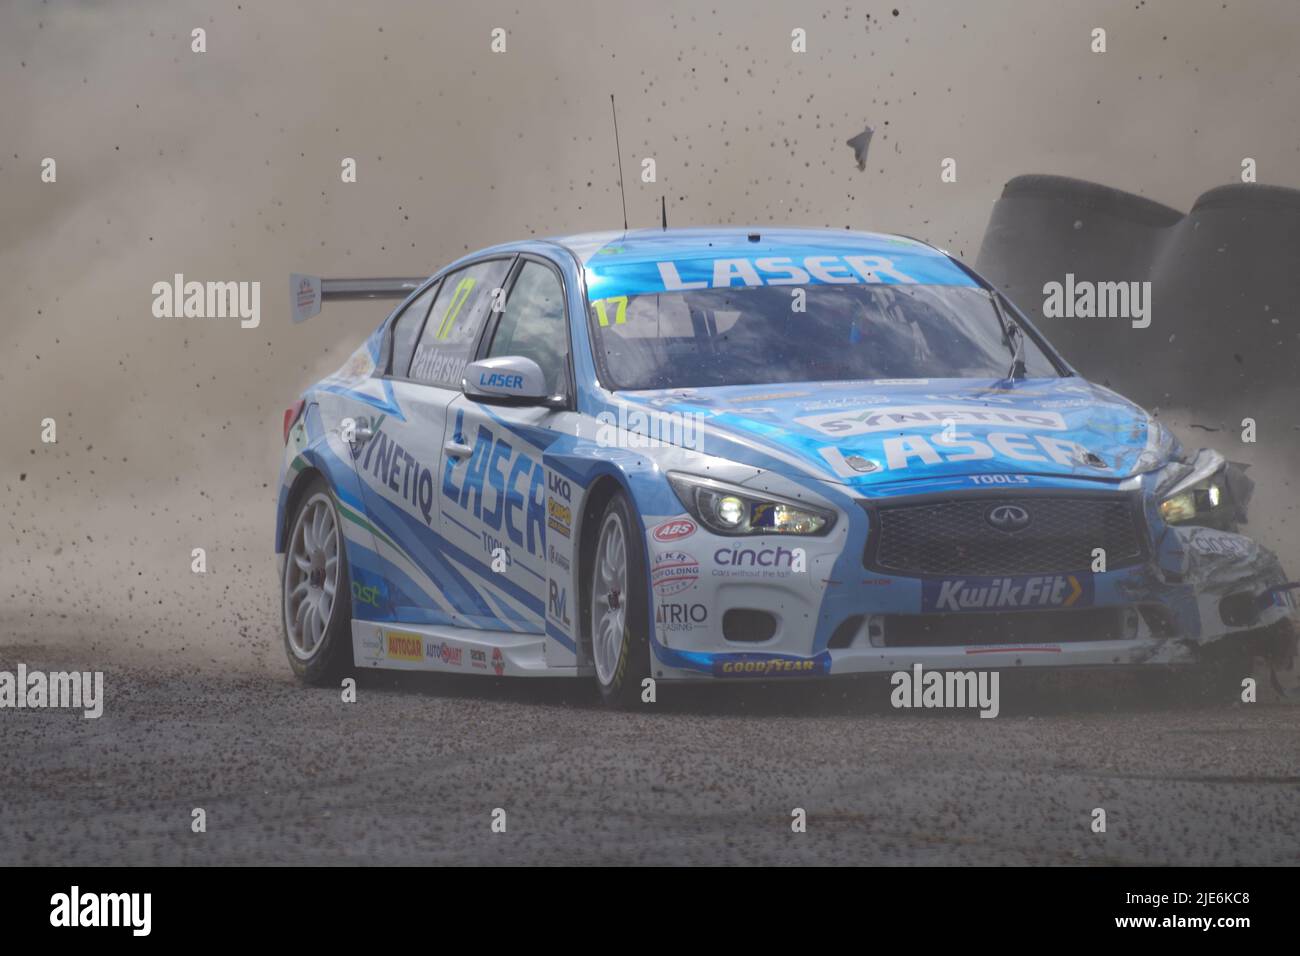 Croft, England, 25 Jun 2022. Dexter Patterson driving an Infiniti for Q50 Laser Tools Racing crashing through the gravel trap during qualifying in the Kwik Fit British Touring Car Championship. Credit: Colin Edwards/Alamy Live News. Stock Photo